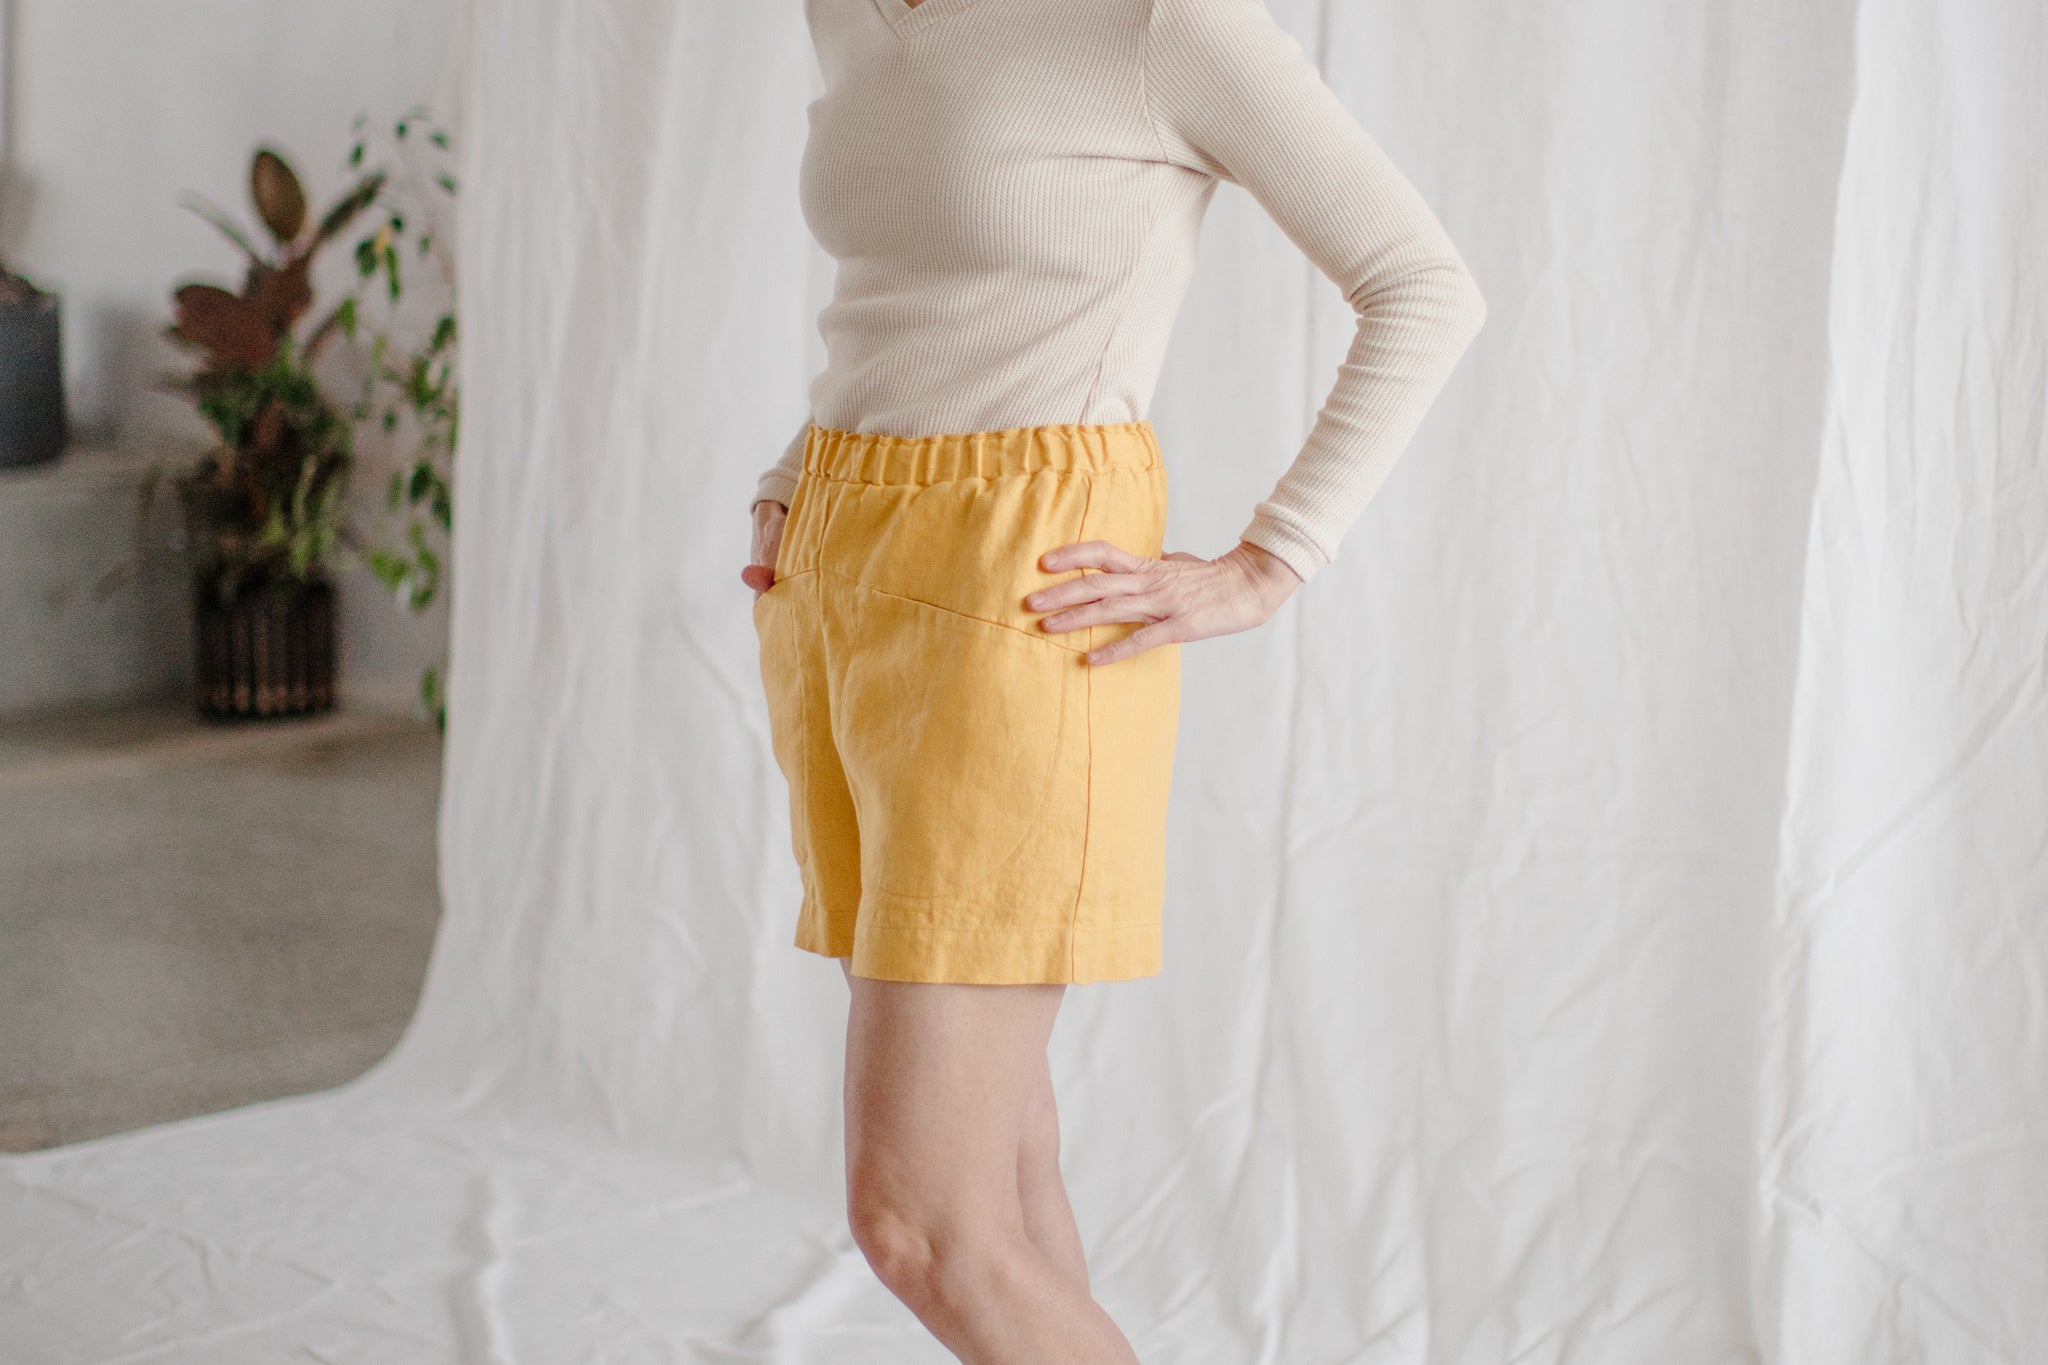 Finally back in stock! Linen shorts in our latest colors - Quince